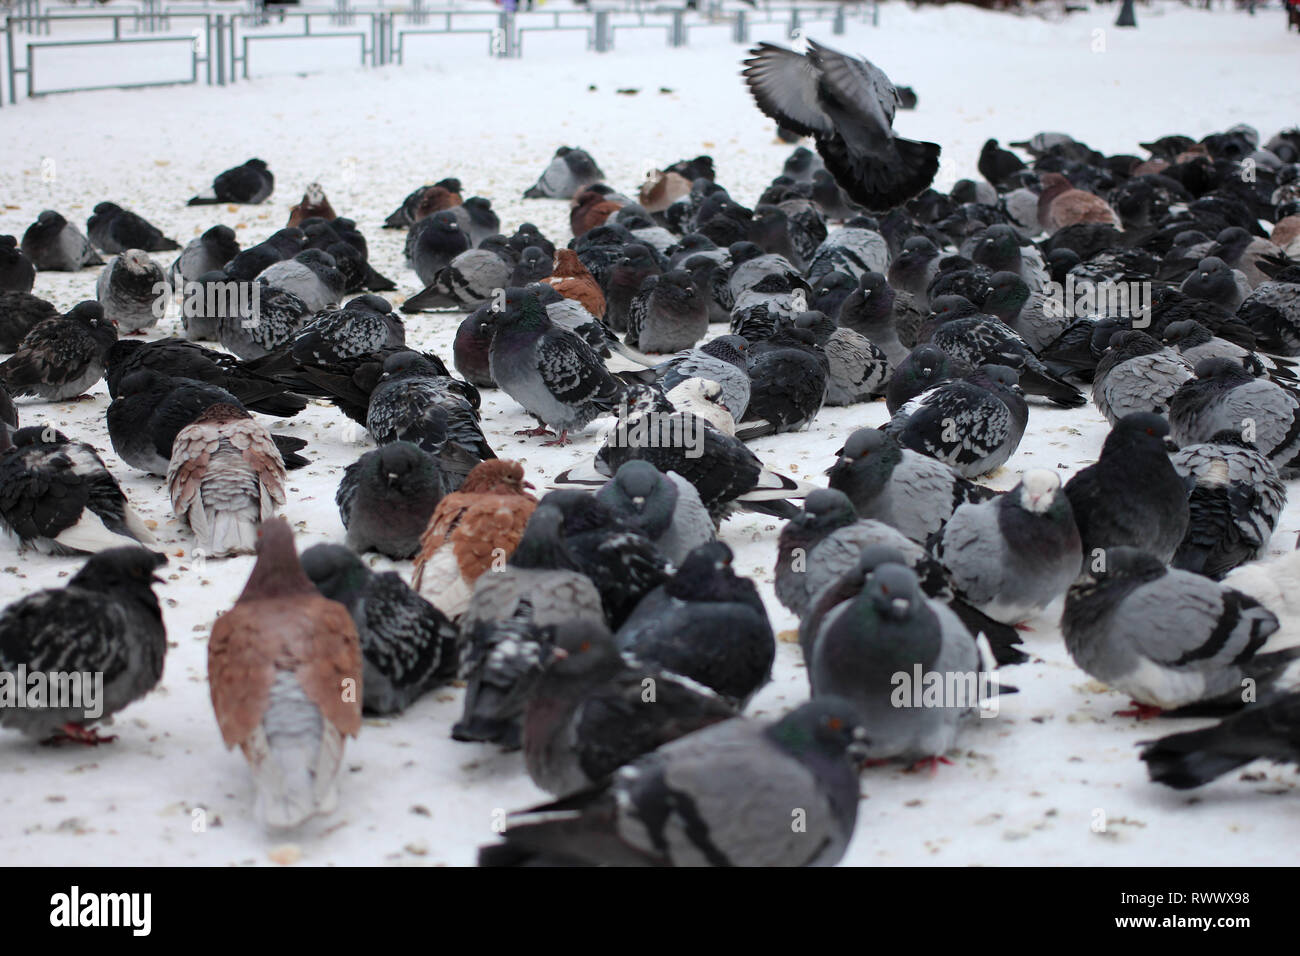 a large flock of city birds pigeons sitting on the snow in the city Stock Photo